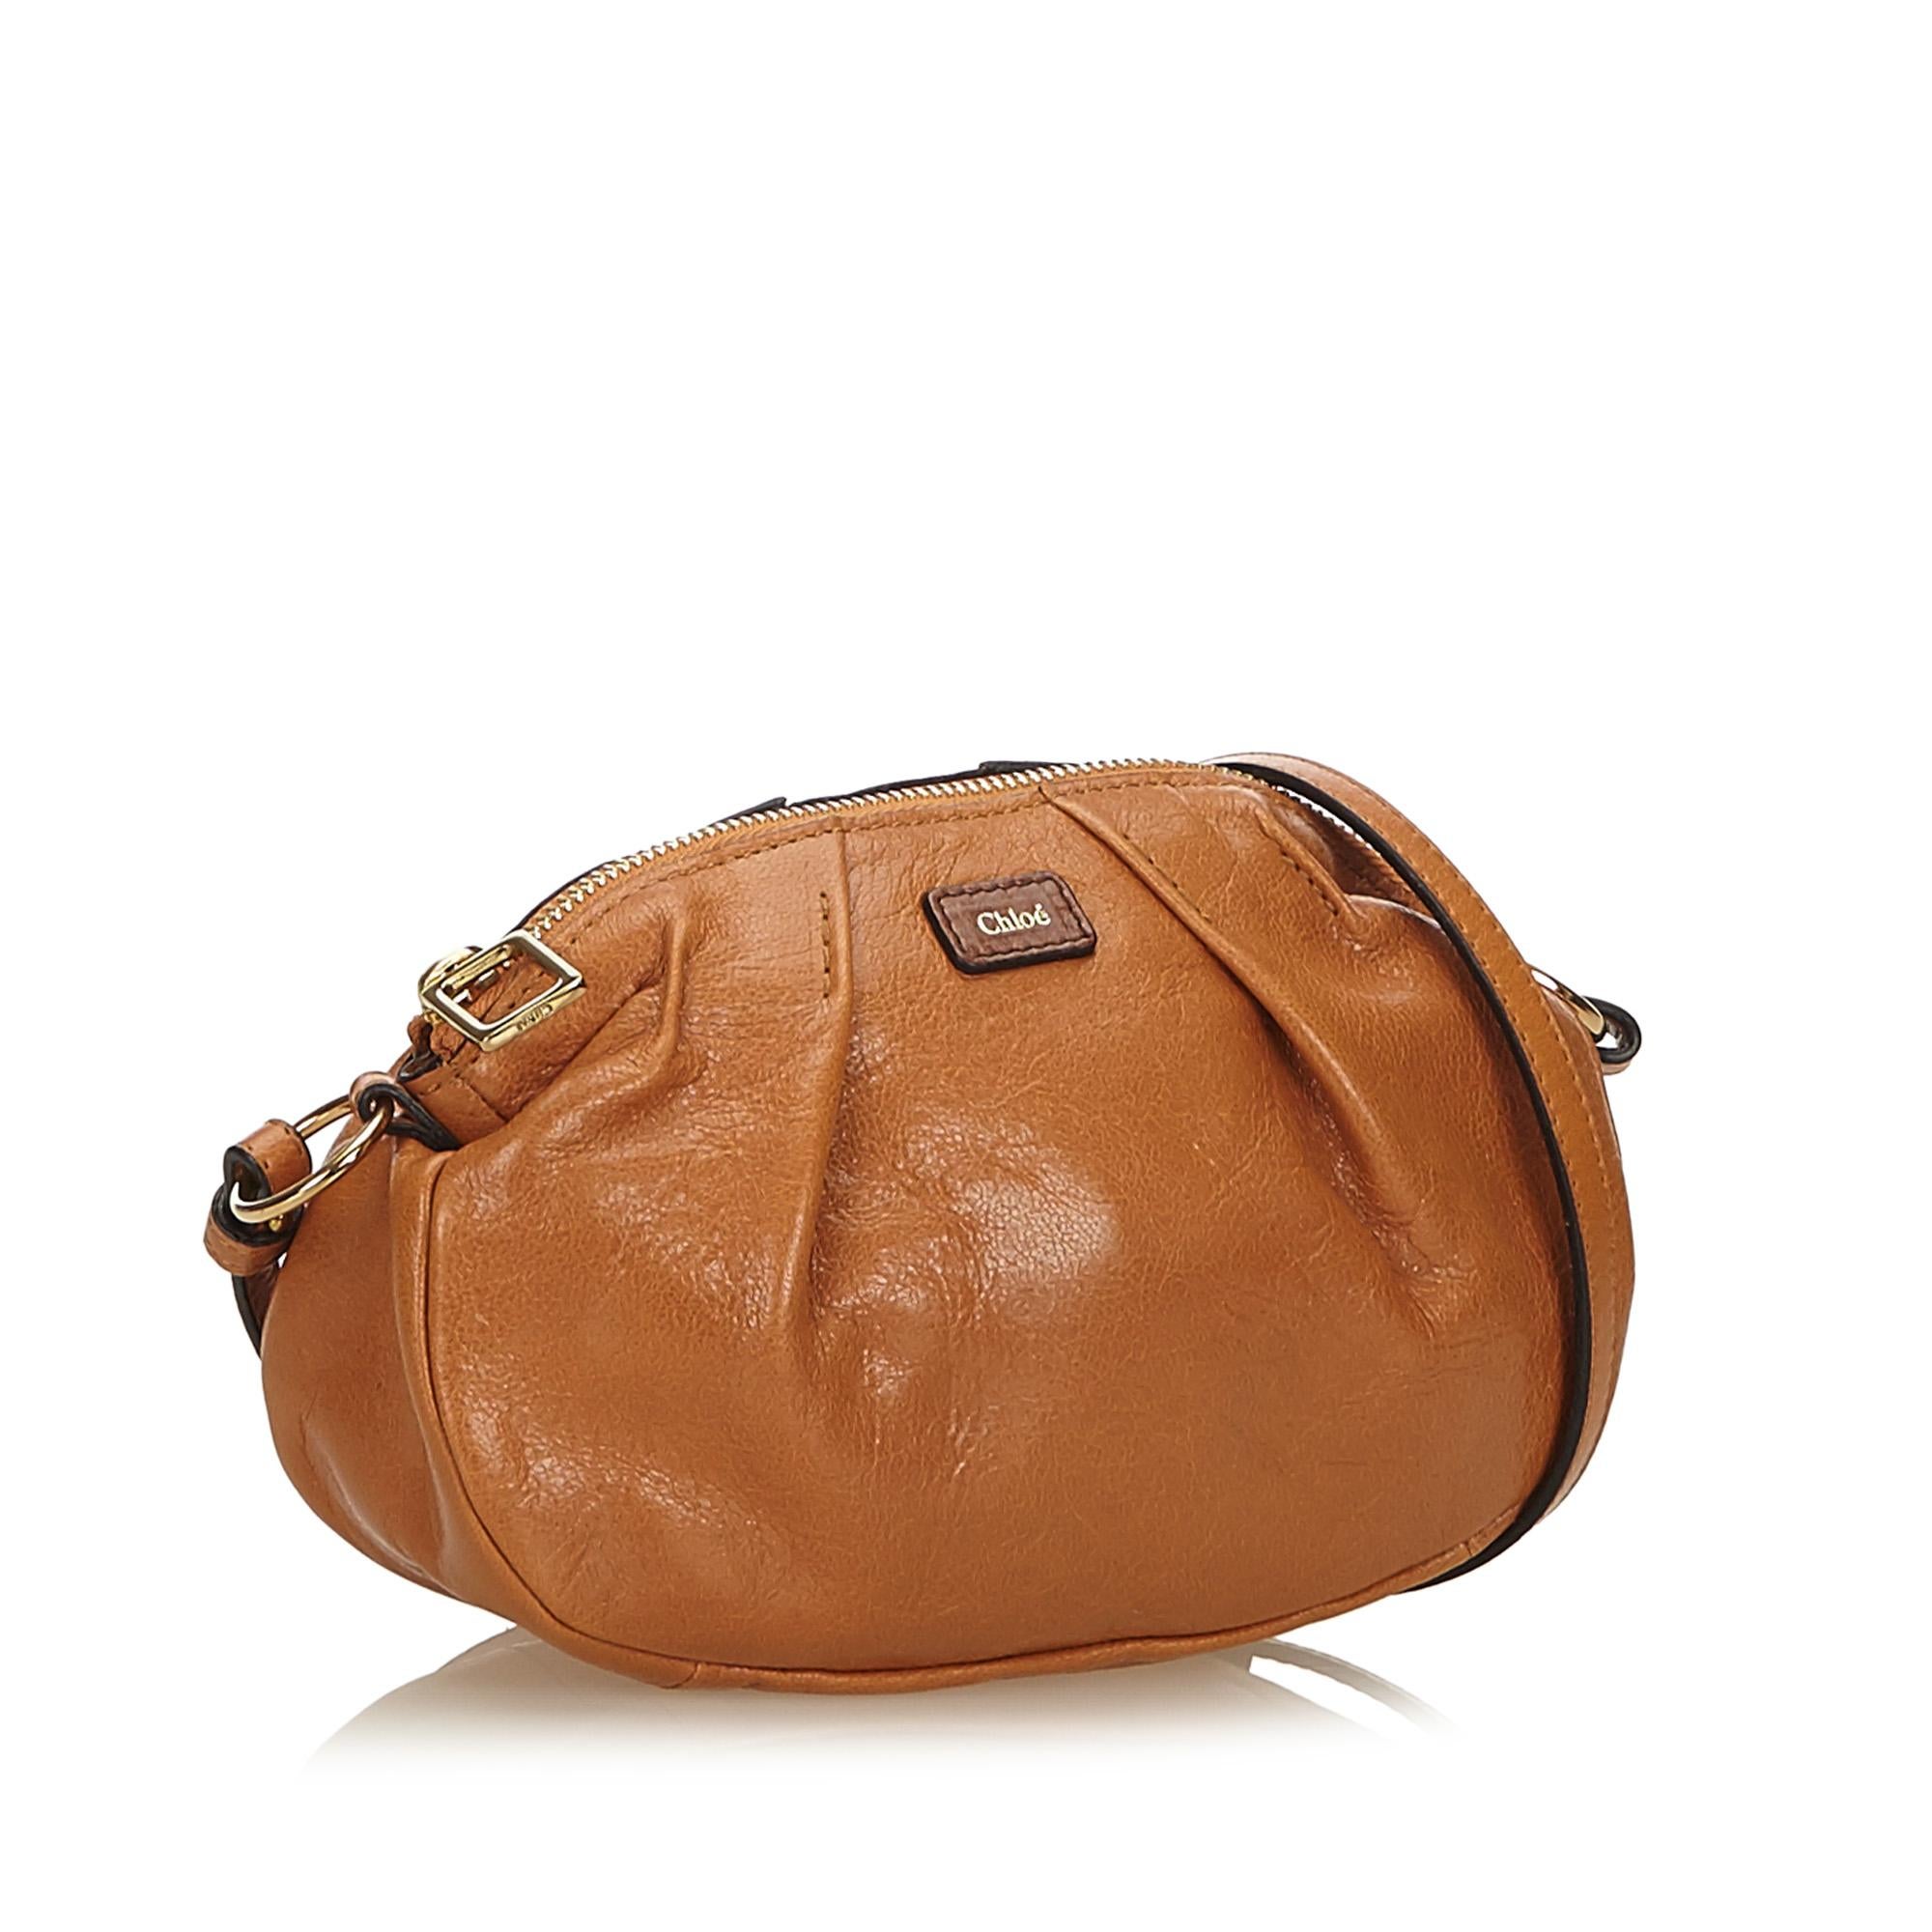 This crossbody bag features a leather body, flat leather strap, top zip closure, and an interior slip pocket.

It carries a B+ condition rating.

Dimensions: 
Length 16.00 cm
Width 19.00 cm
Depth 6.00 cm
Shoulder Drop 52.00 cm

Inclusions: Dust Bag,